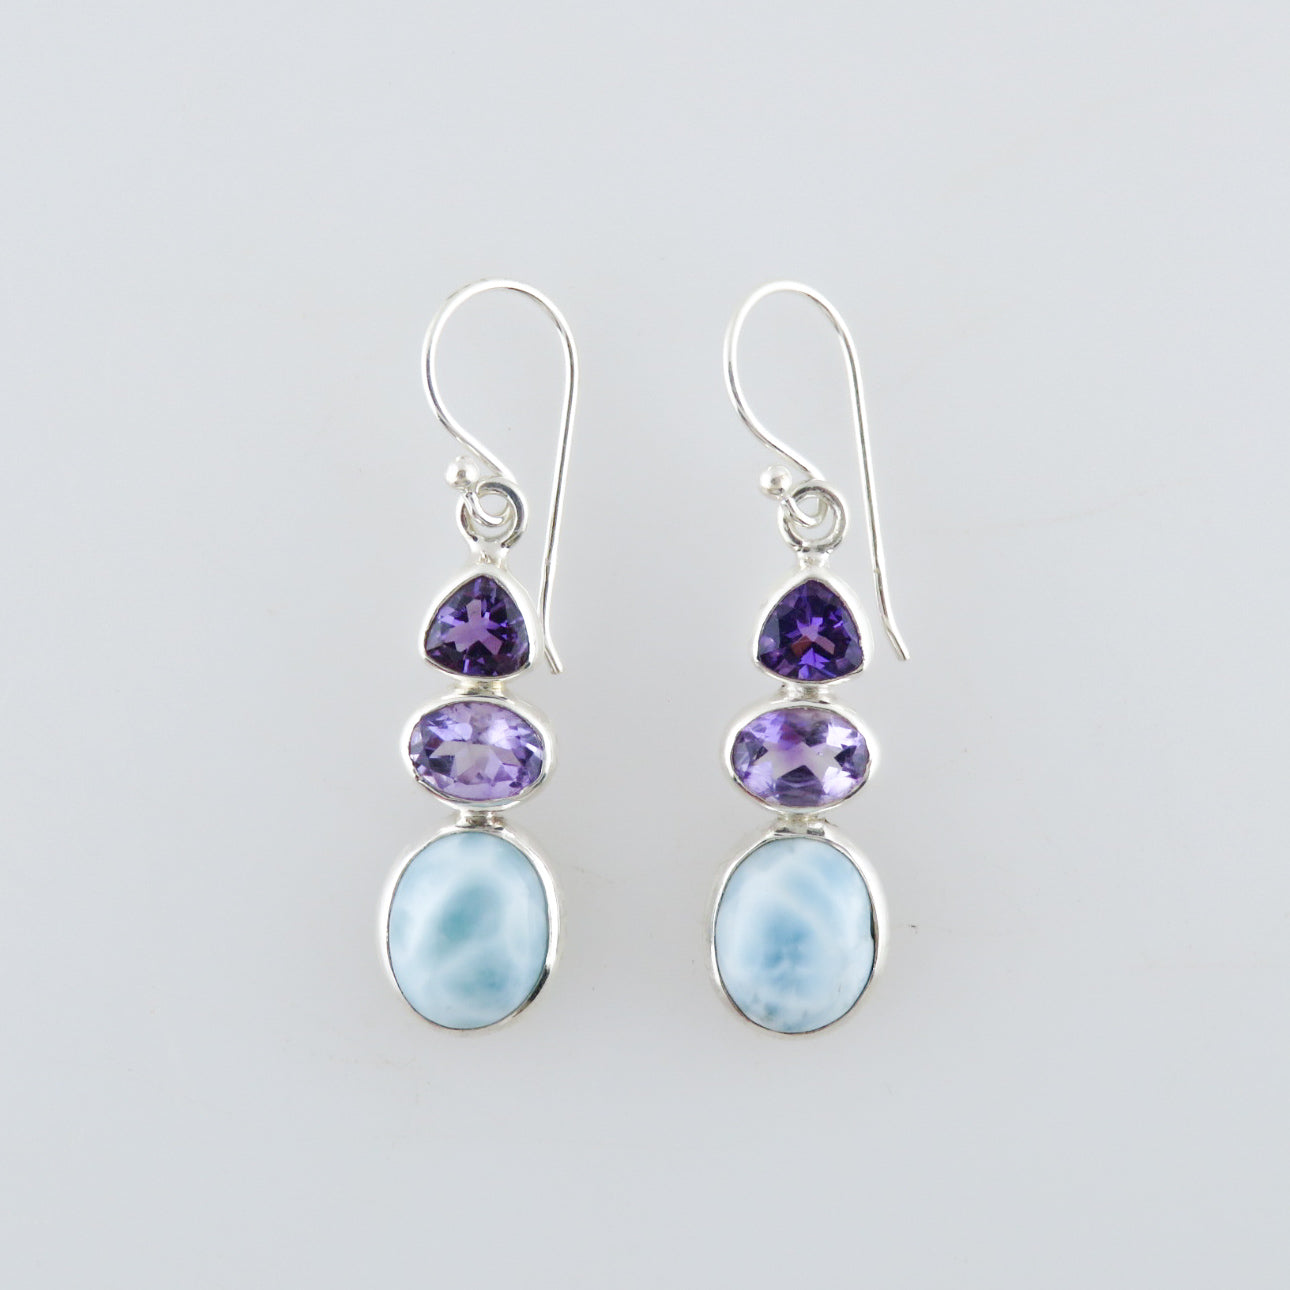 Larimar Stone Sterling Silver Earrings with Amethyst